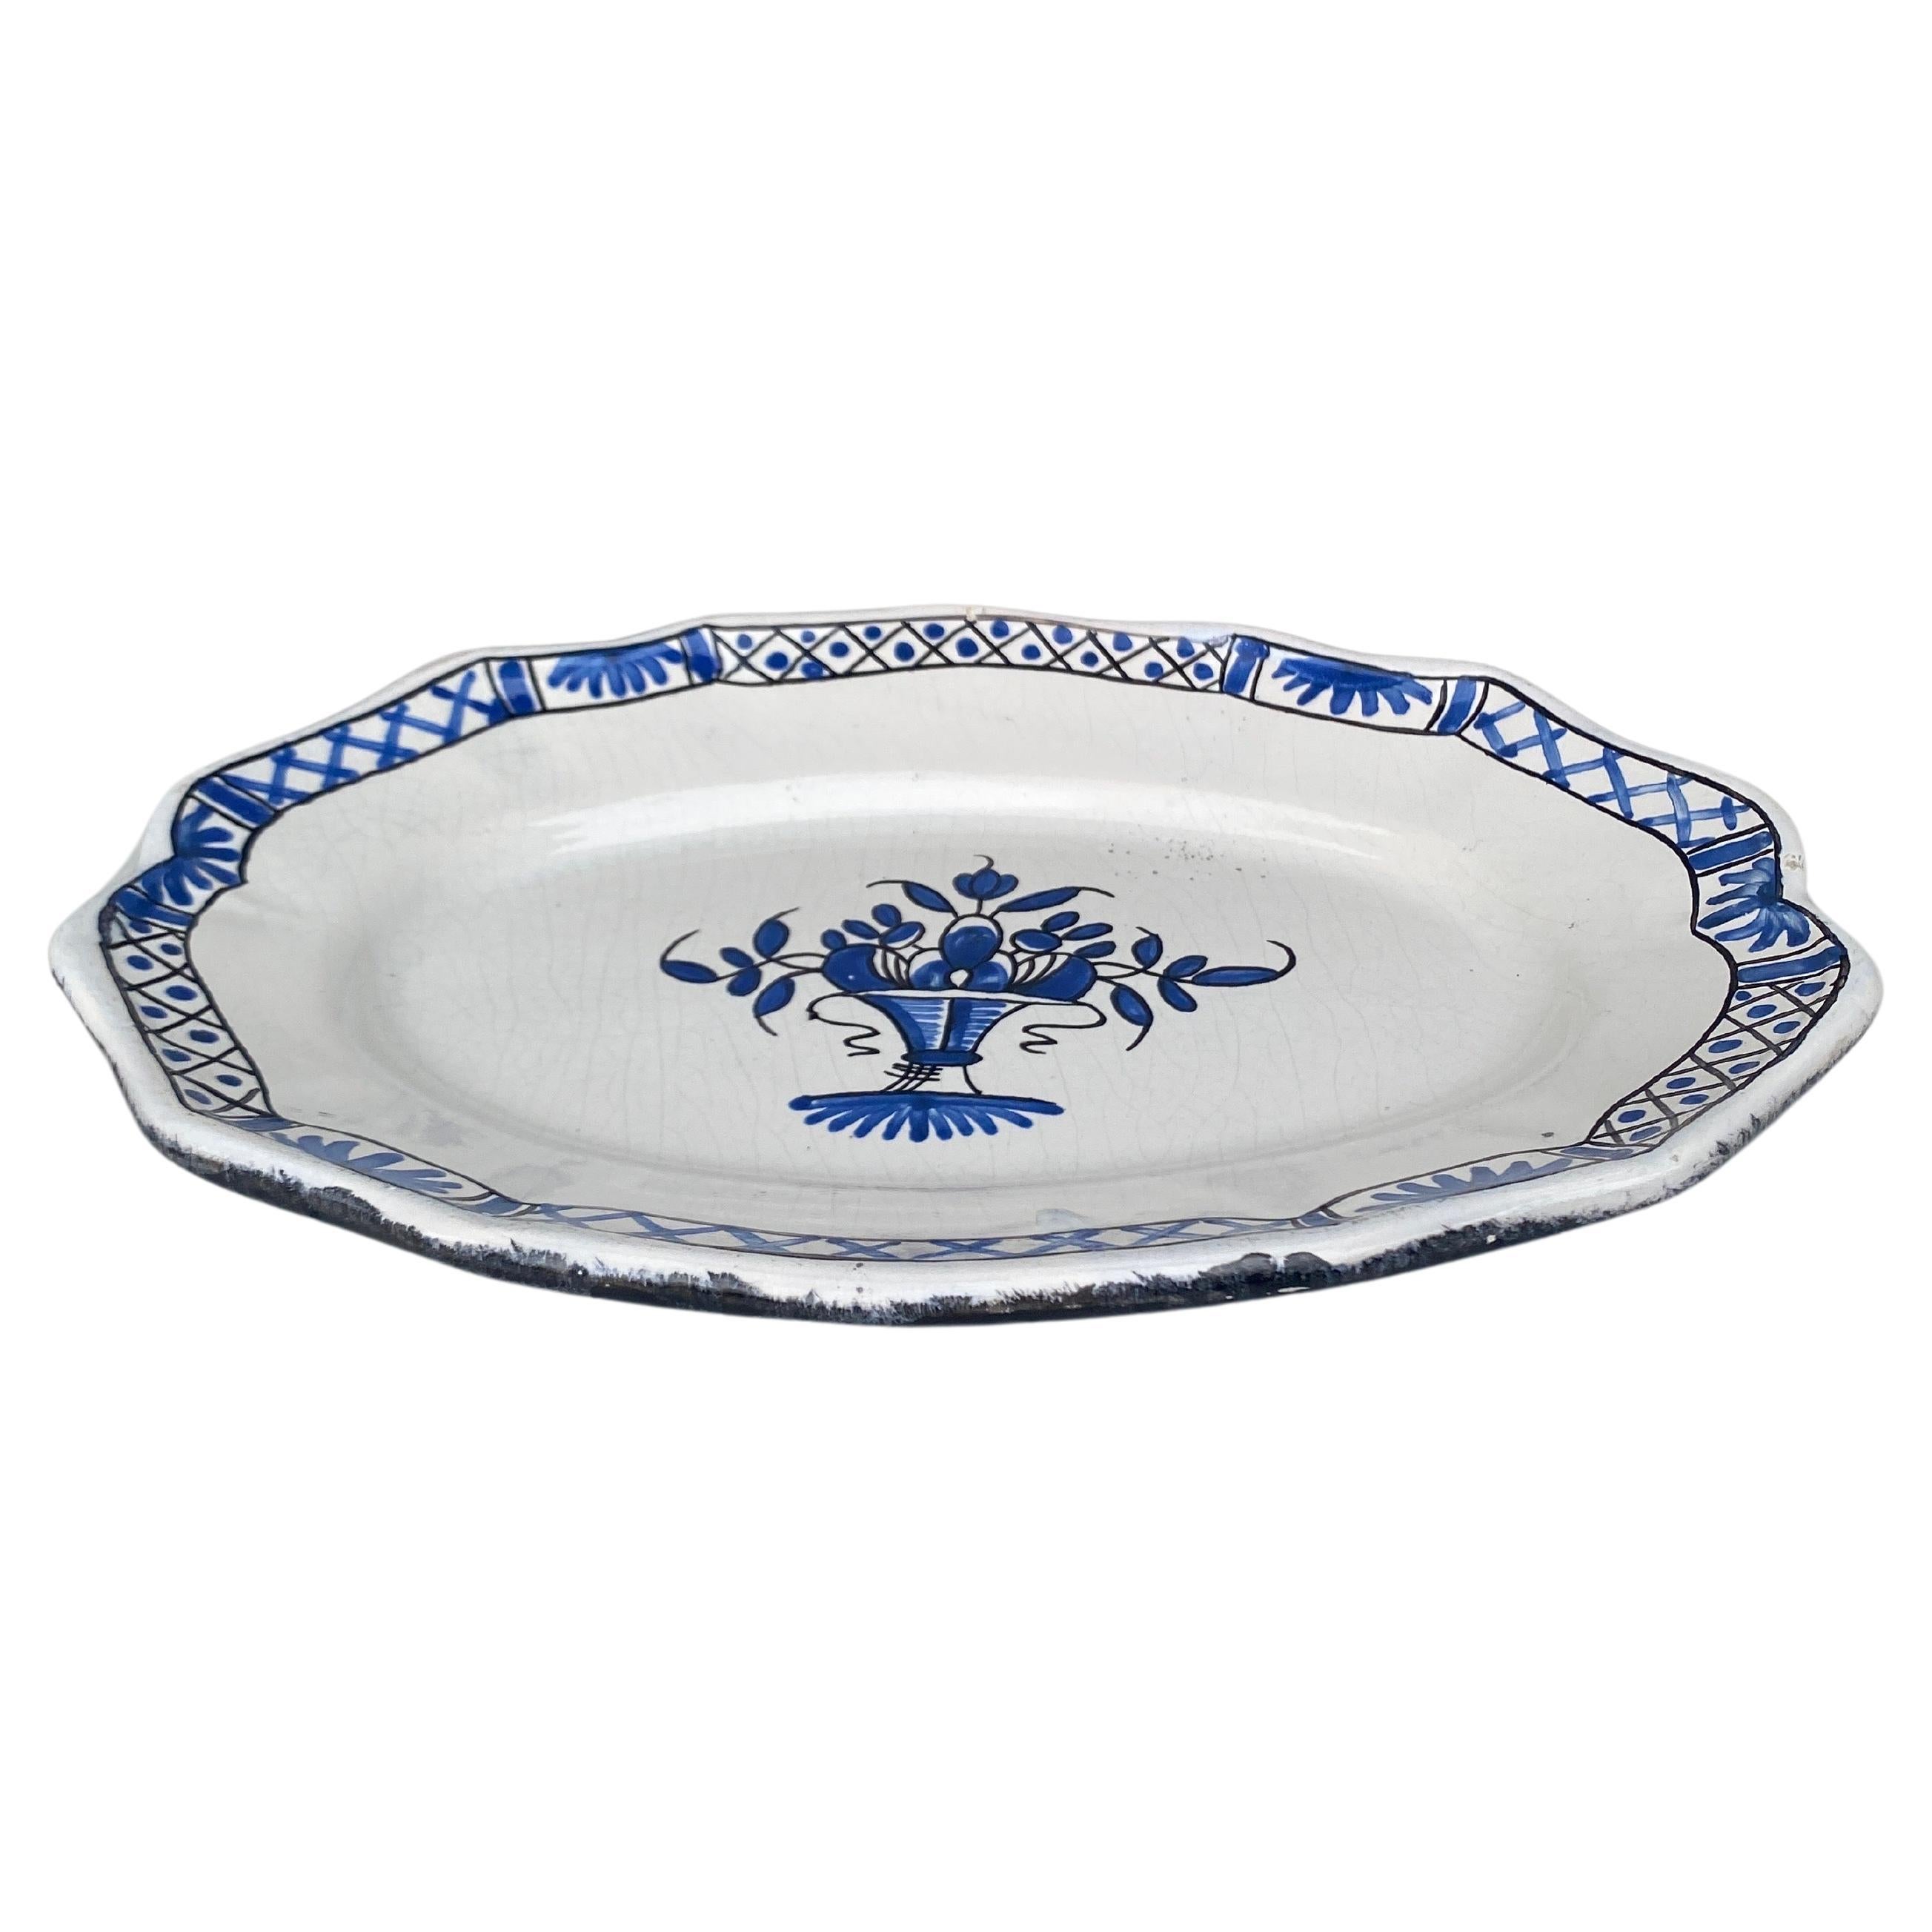 French Faience Blue & White Platter circa 1950.